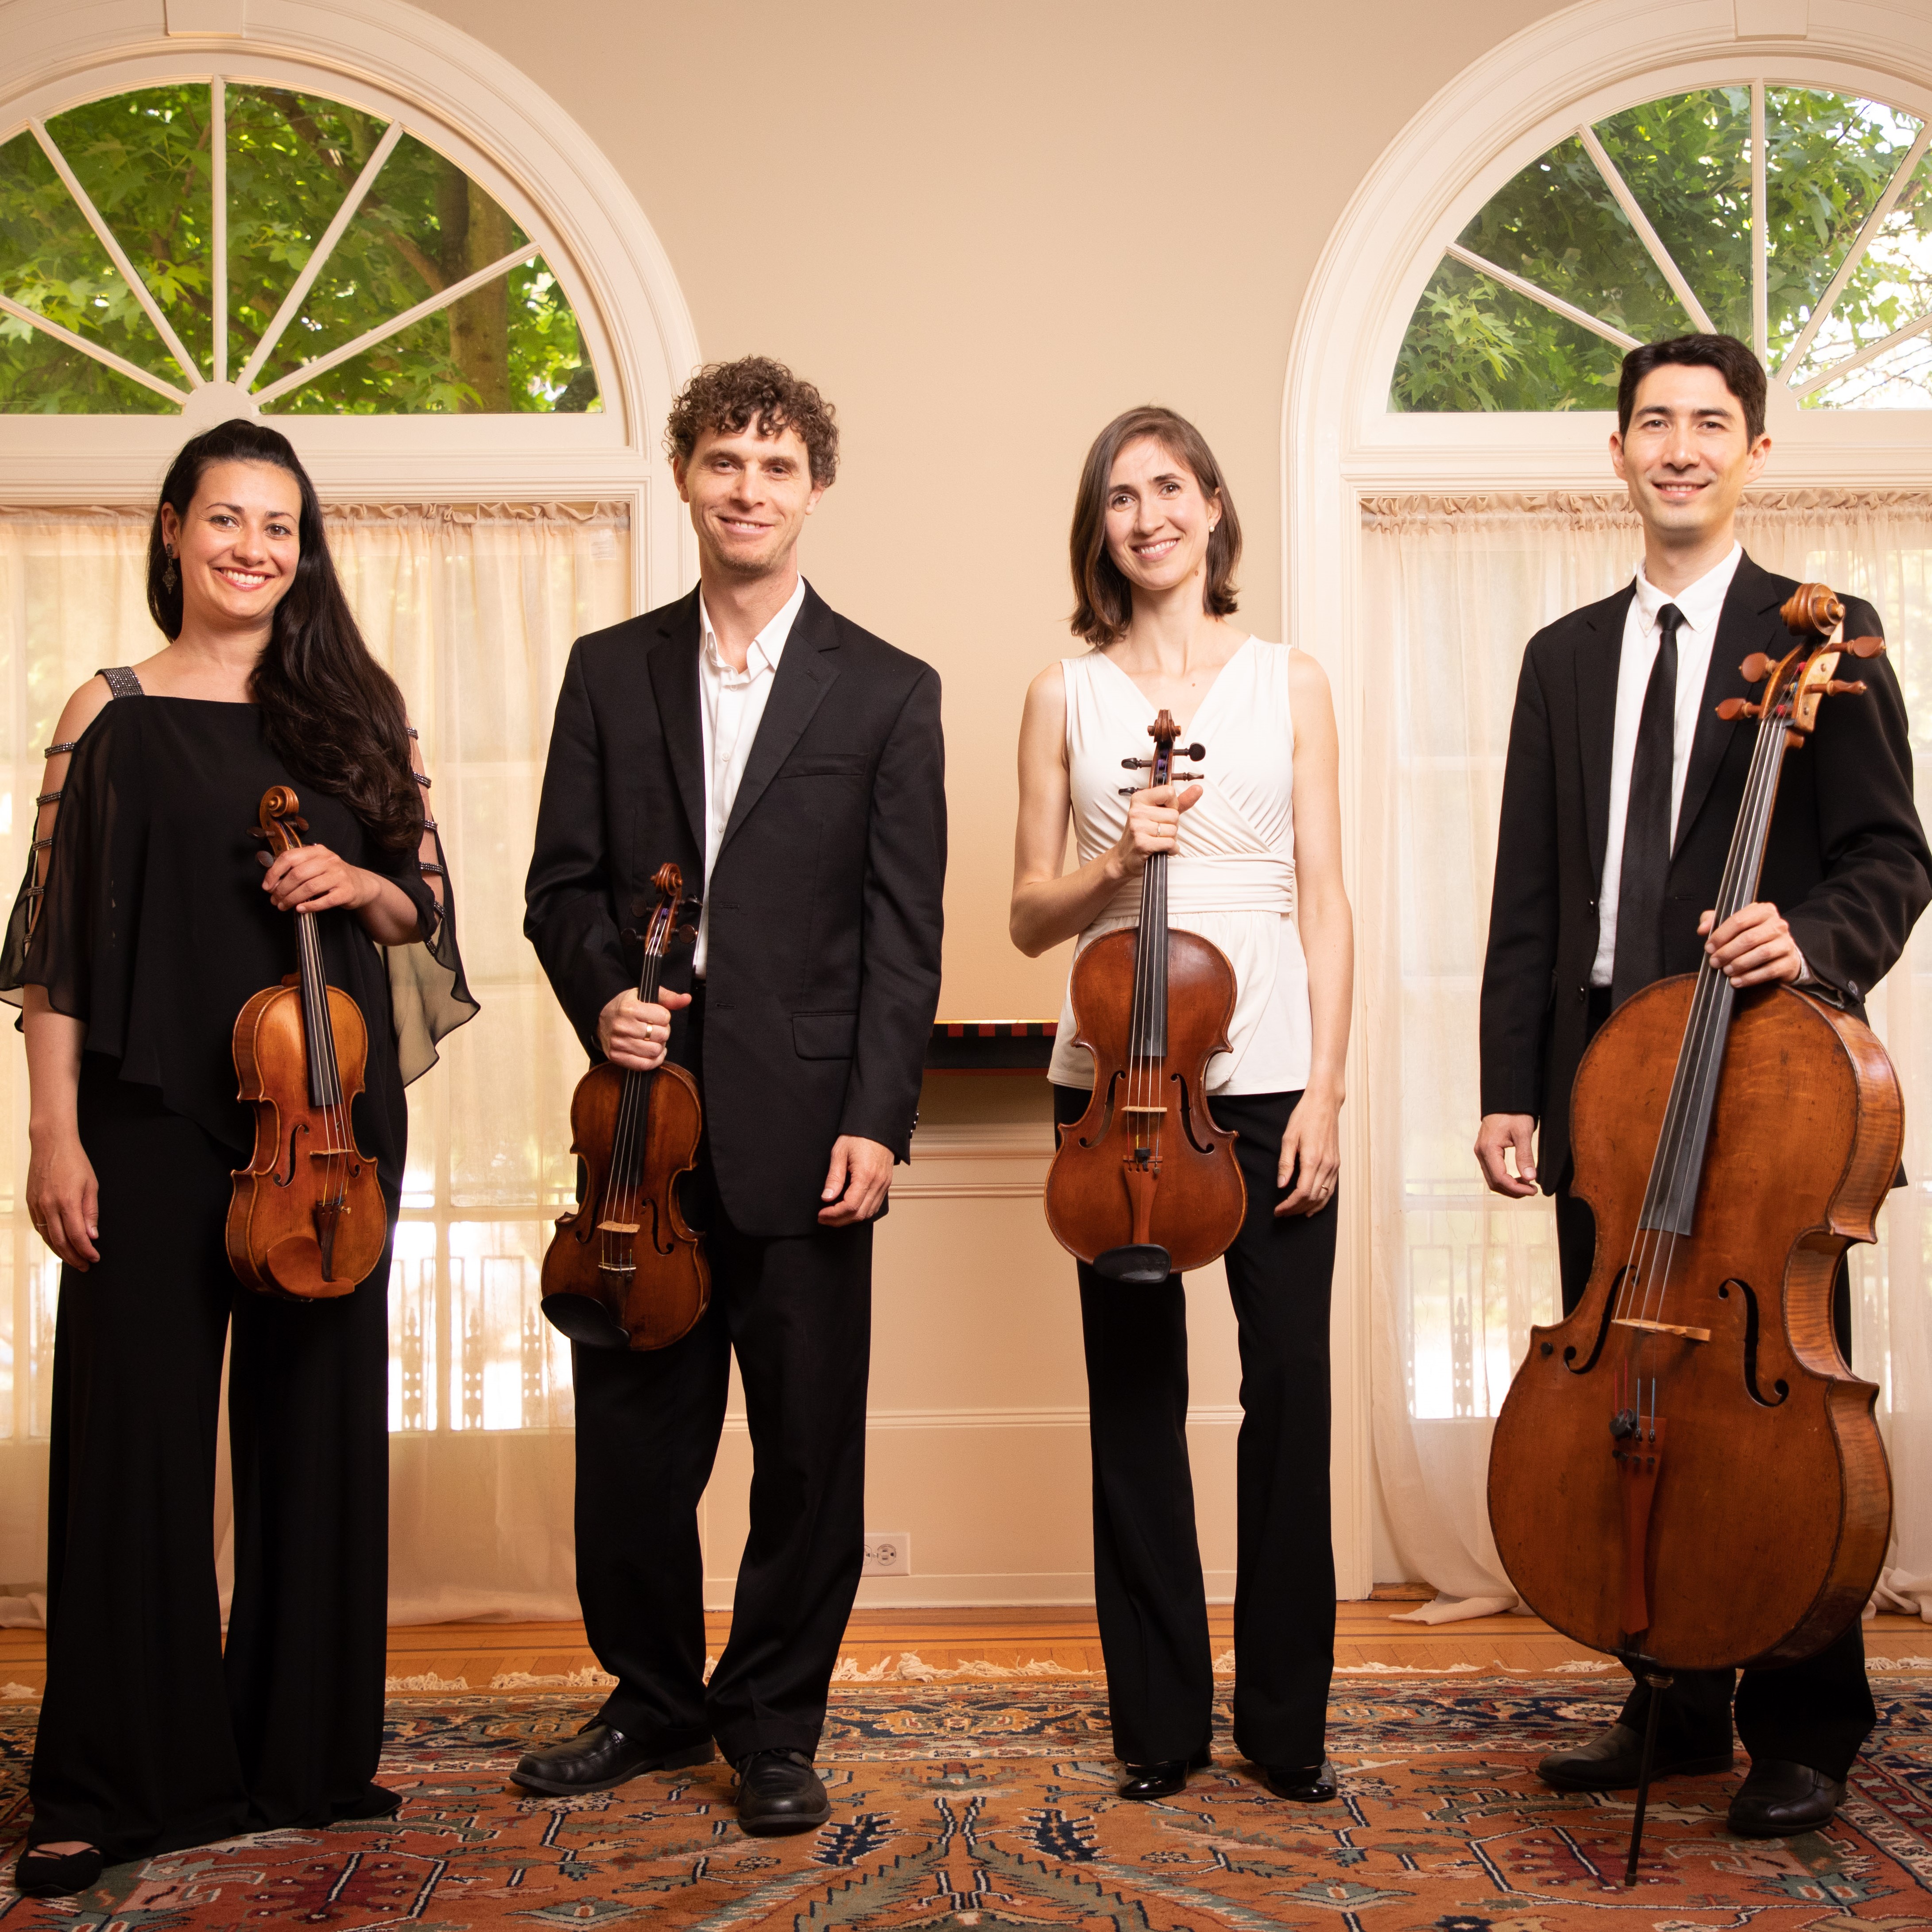 Classical Music In The Garden: Chamber Music Society of San Francisco 10th Anniversary Concert